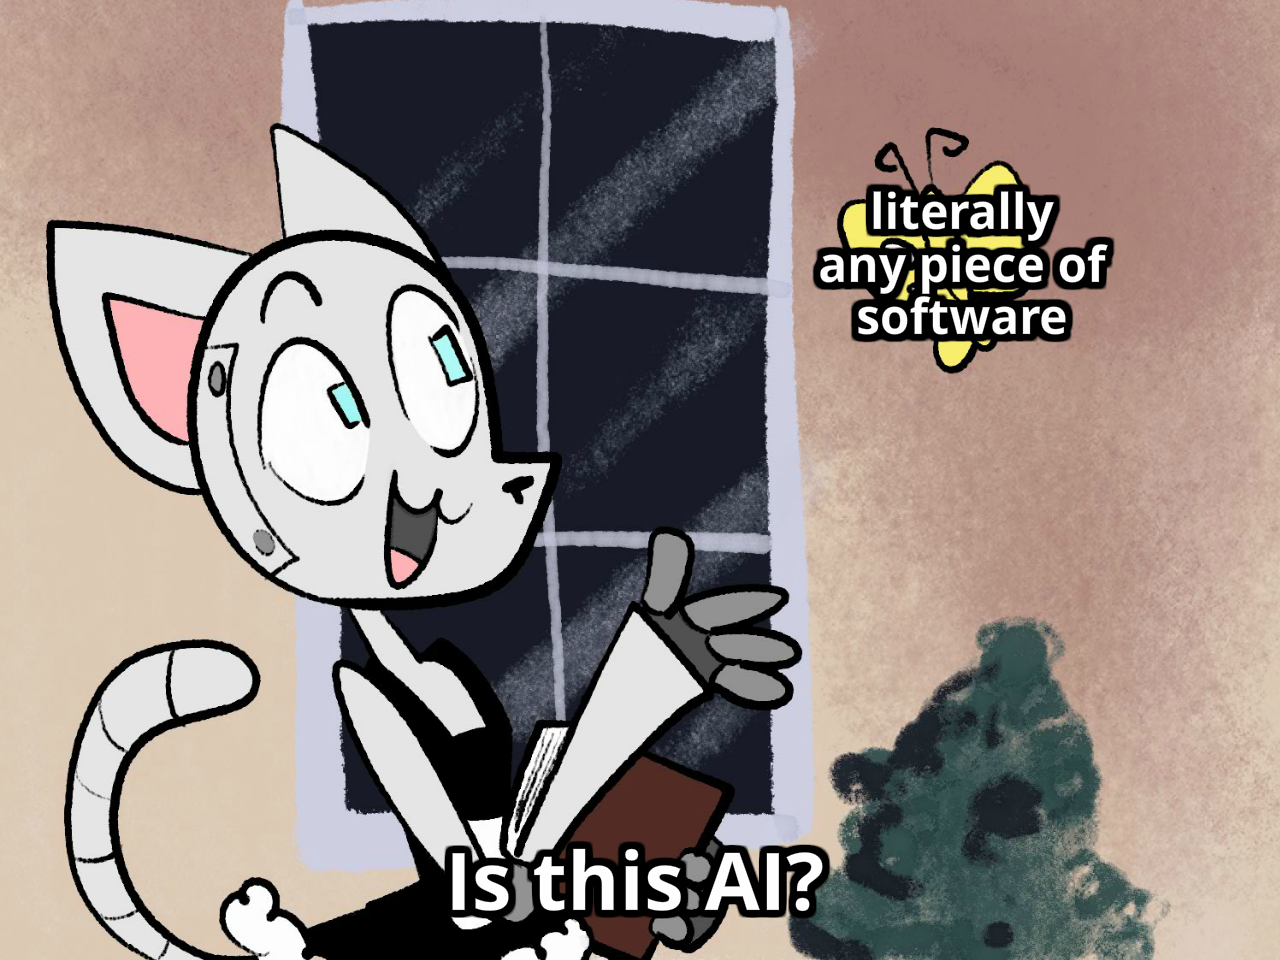 Riff of the "Is this a pigeon?" meme. Robot Catboy gestures at a butterfly labeled "literally any piece of software". Caption: "Is this AI?"